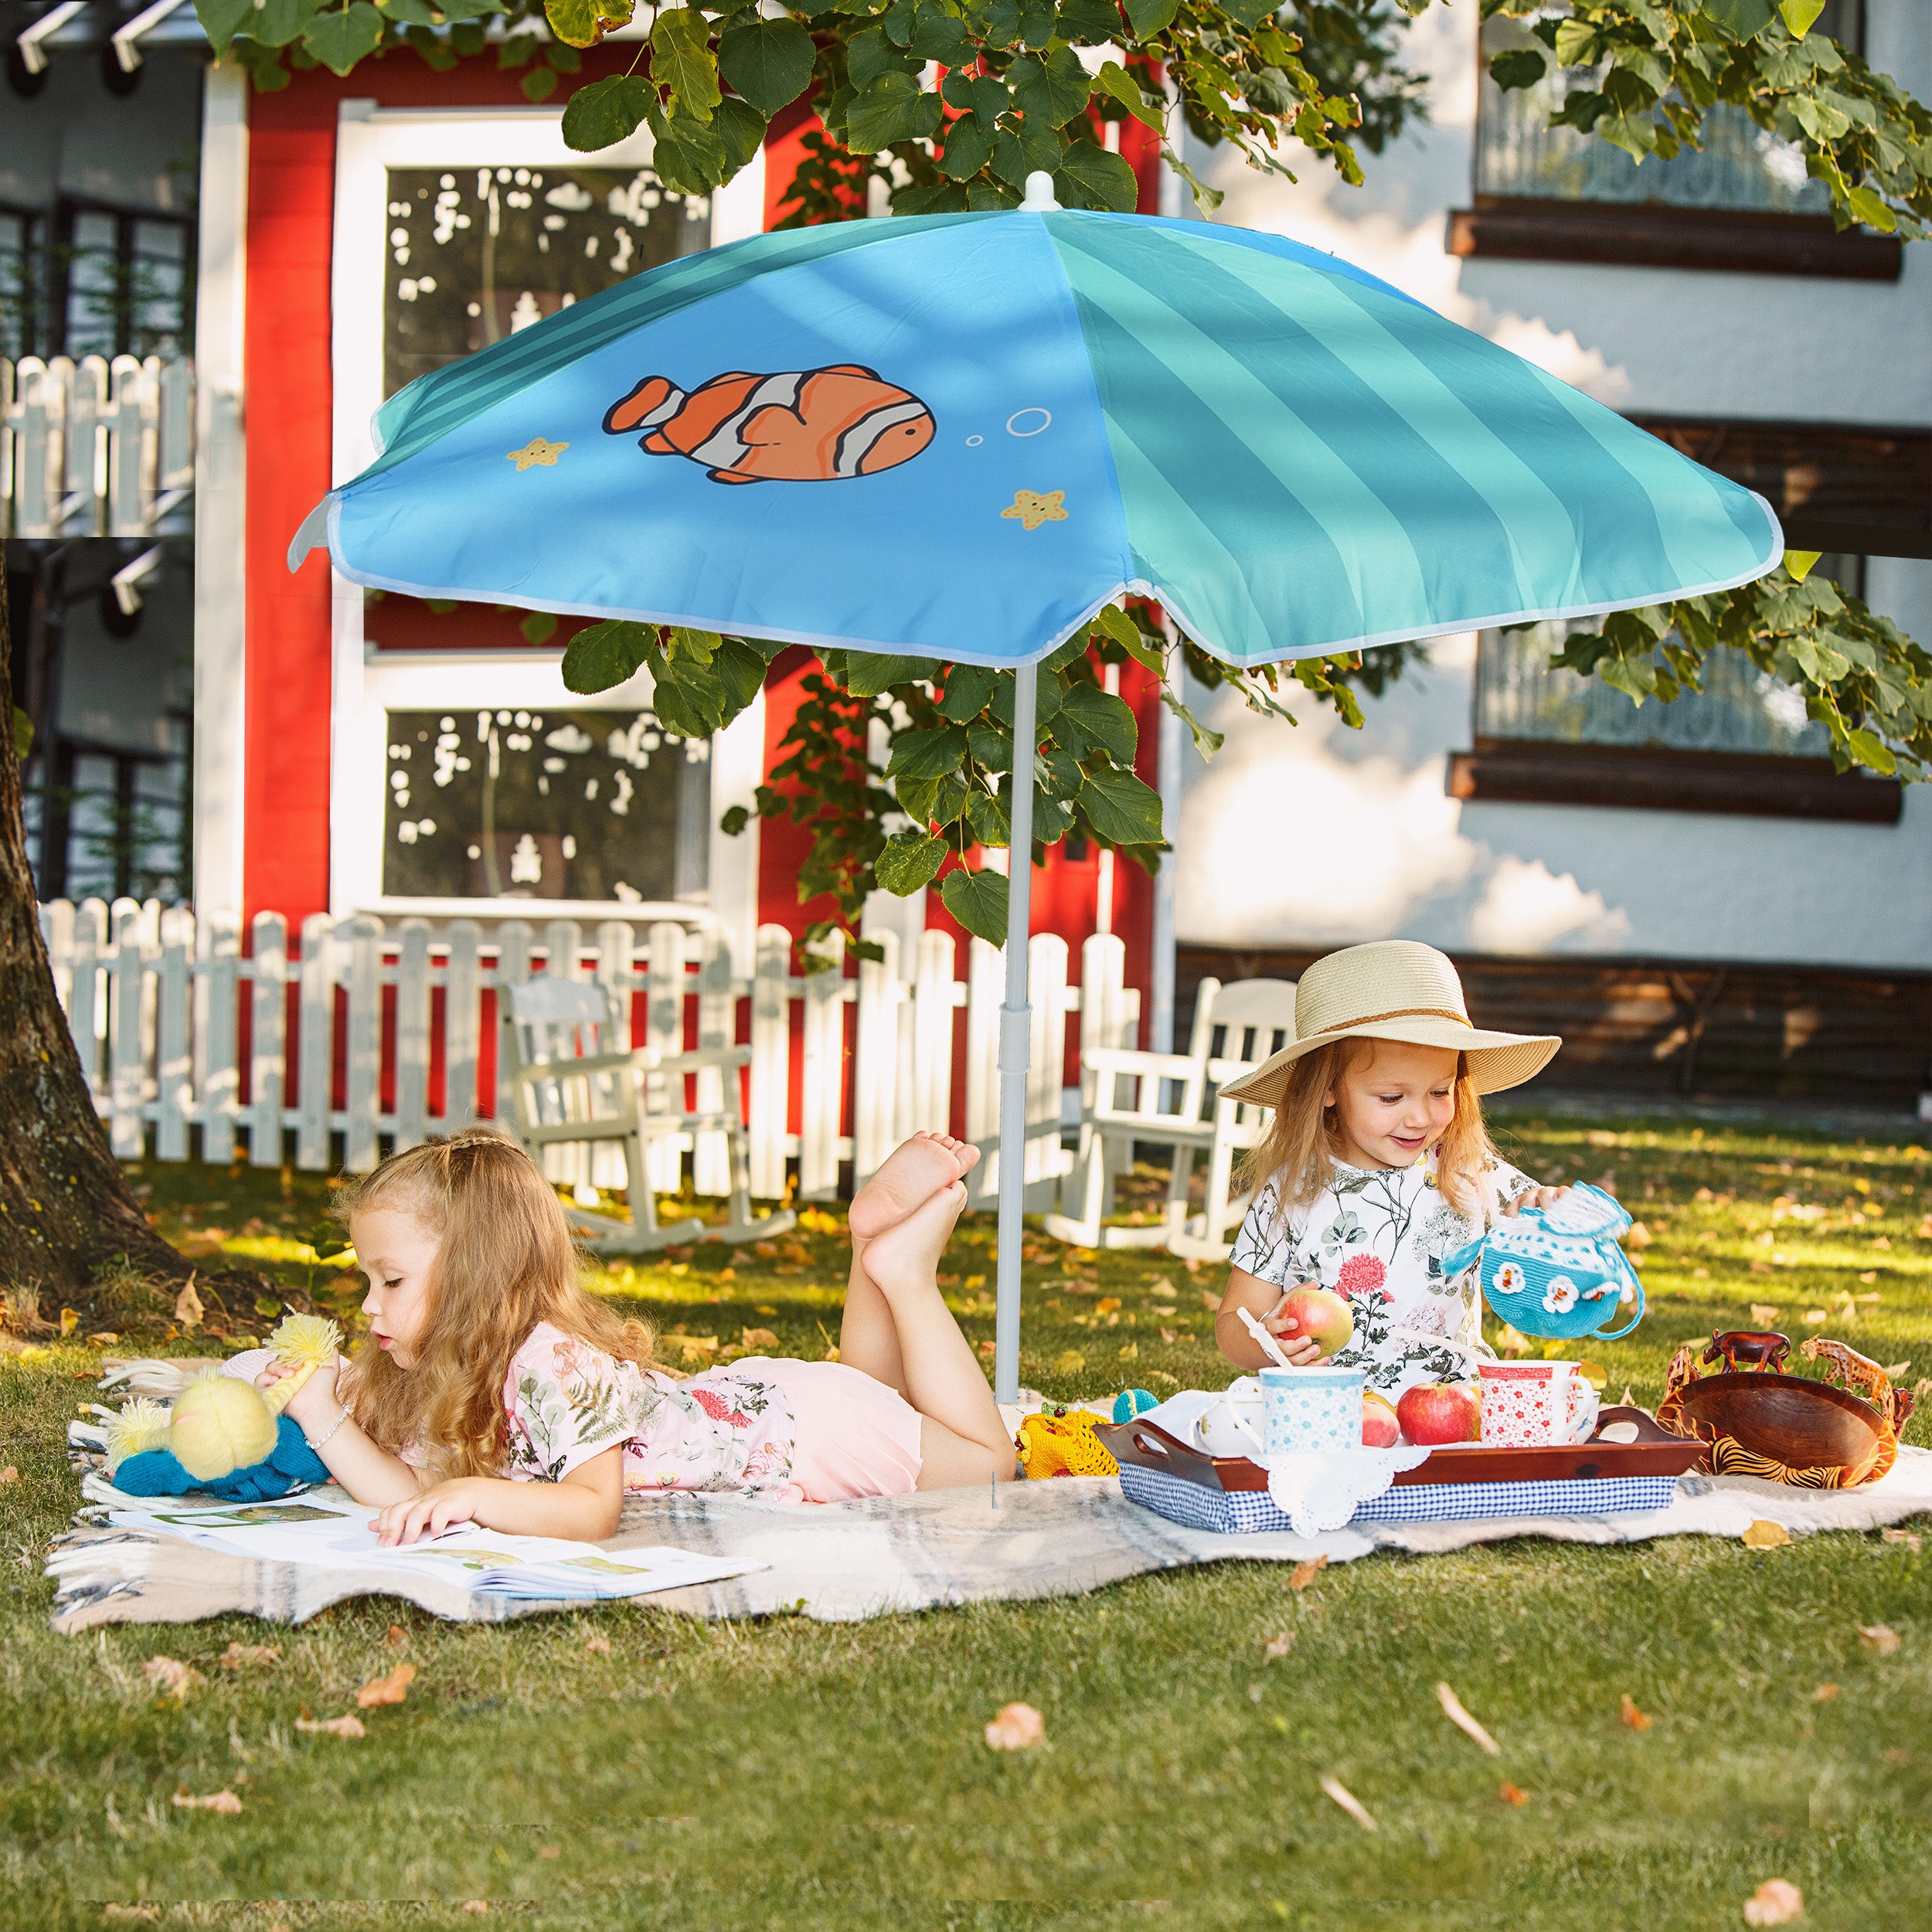 Sun Safety for Children: Tips for Keeping Kids Protected During Outdoor Play